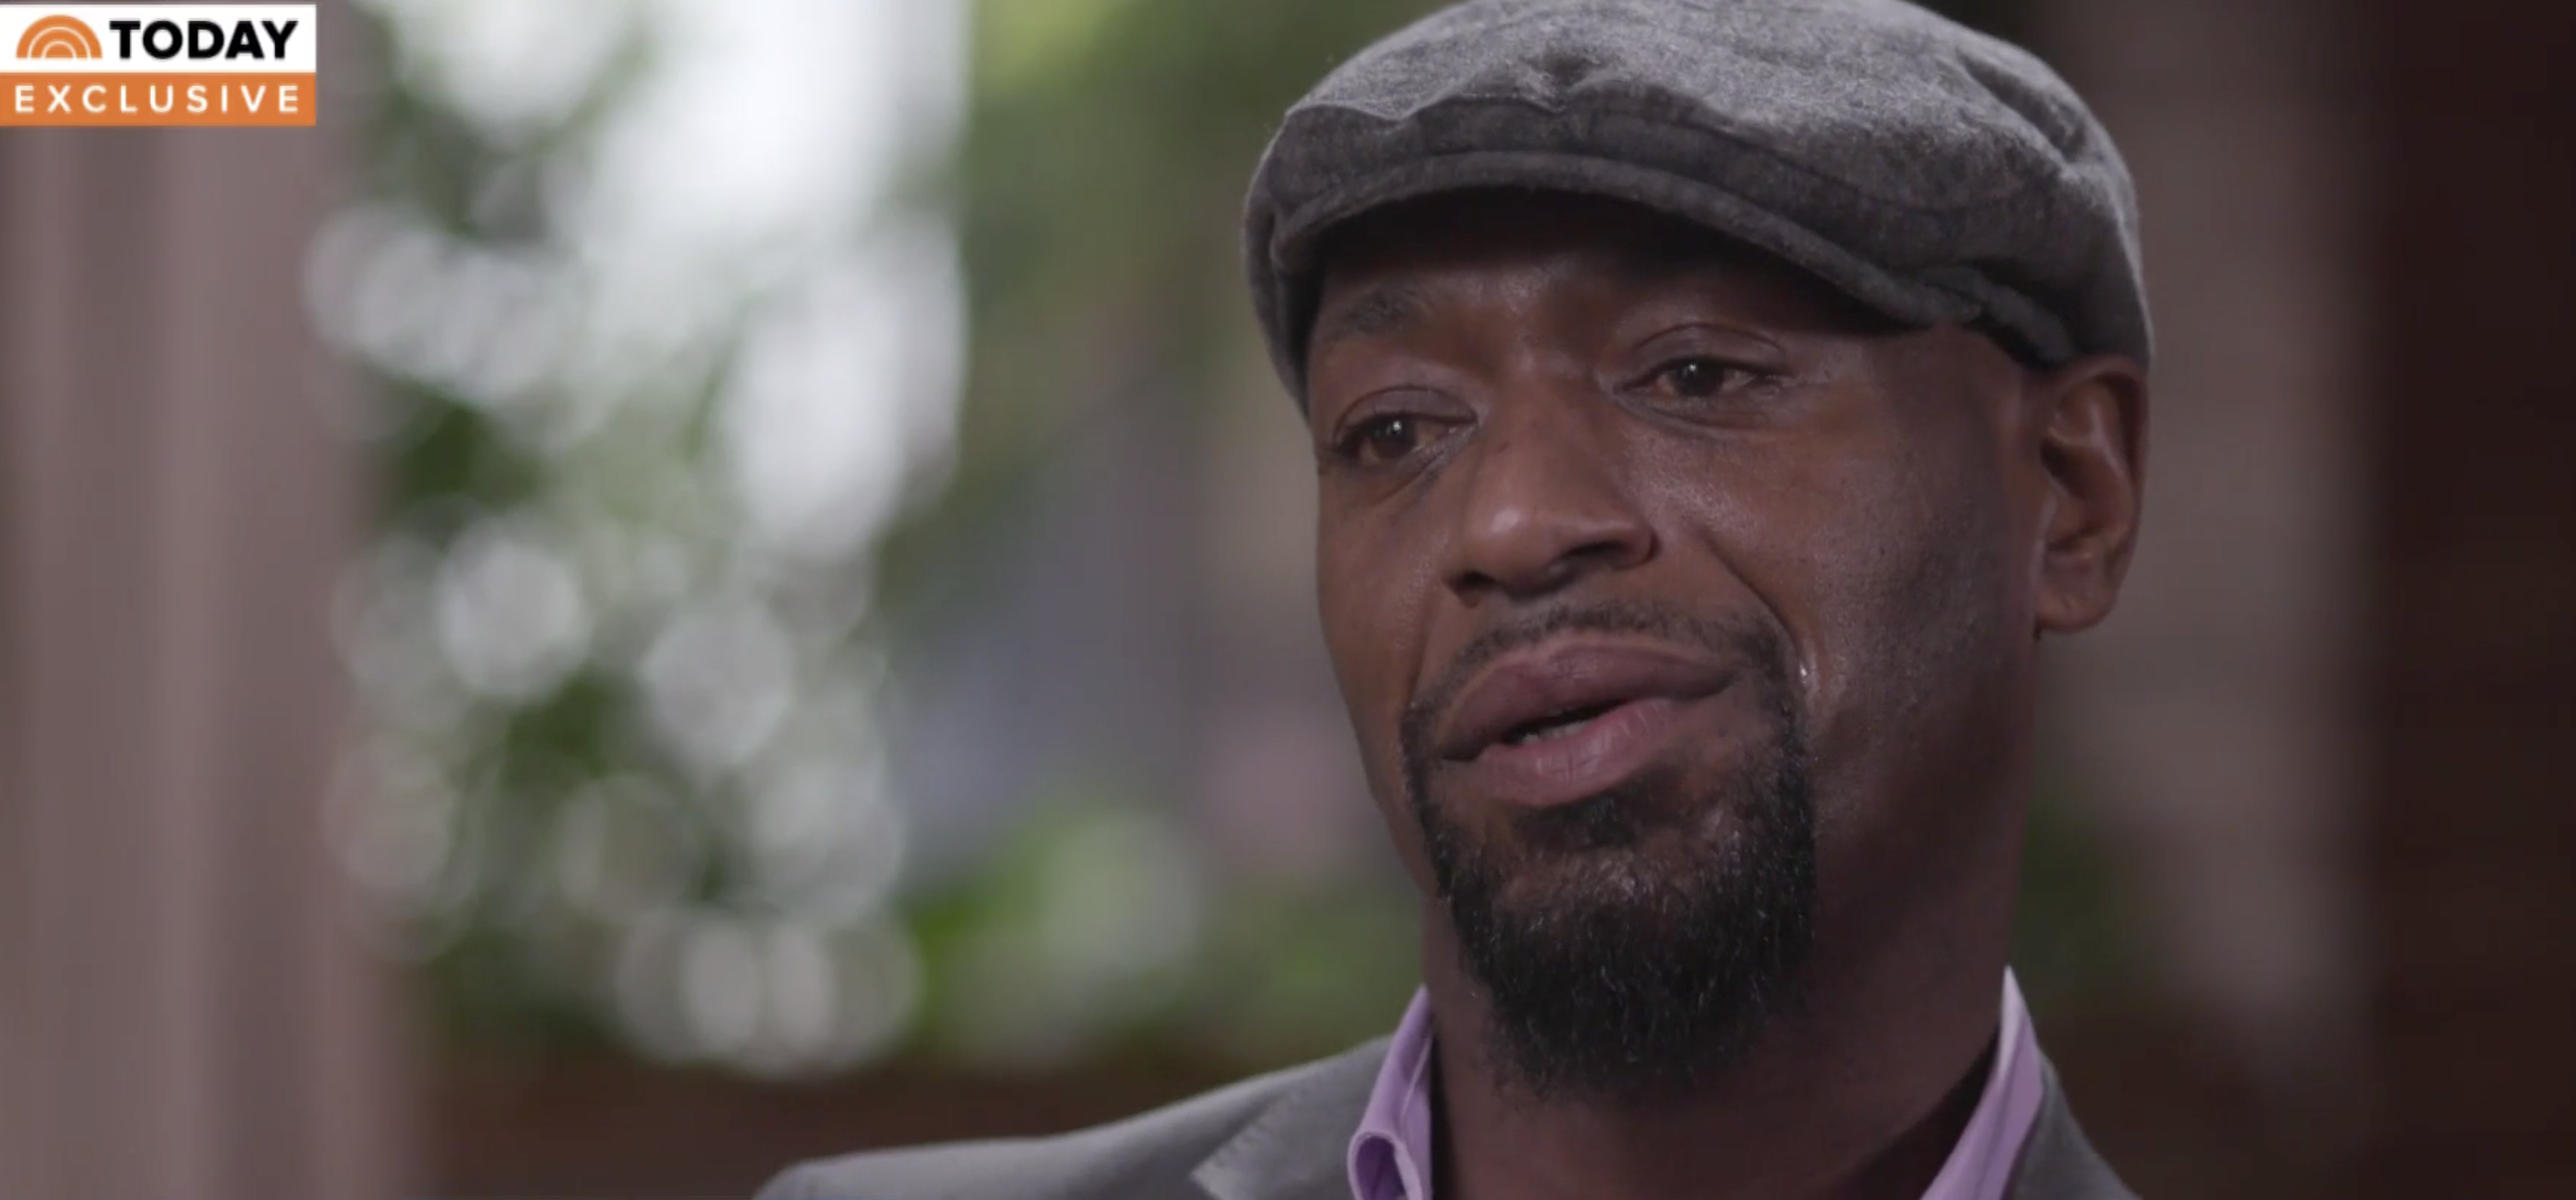 Huwe Burton speaks out on Today Show for the first time since his exoneration